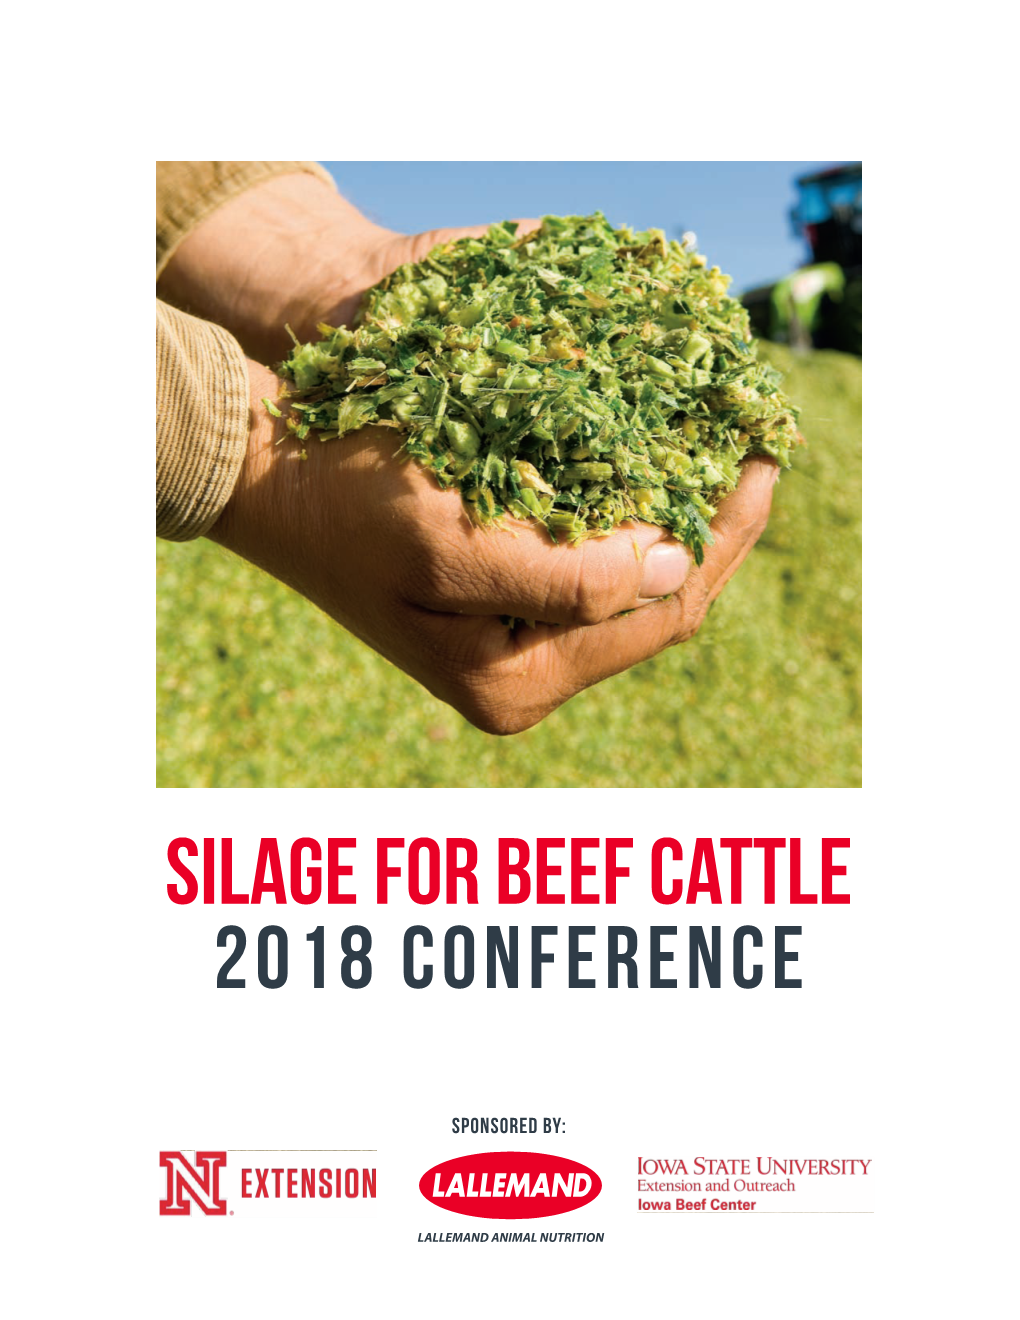 Silage for Beef Cattle Conference Silage for Beef Cattle Conference Silage for Beef Cattle Sponsors: 2018 CONFERENCE Sponsors